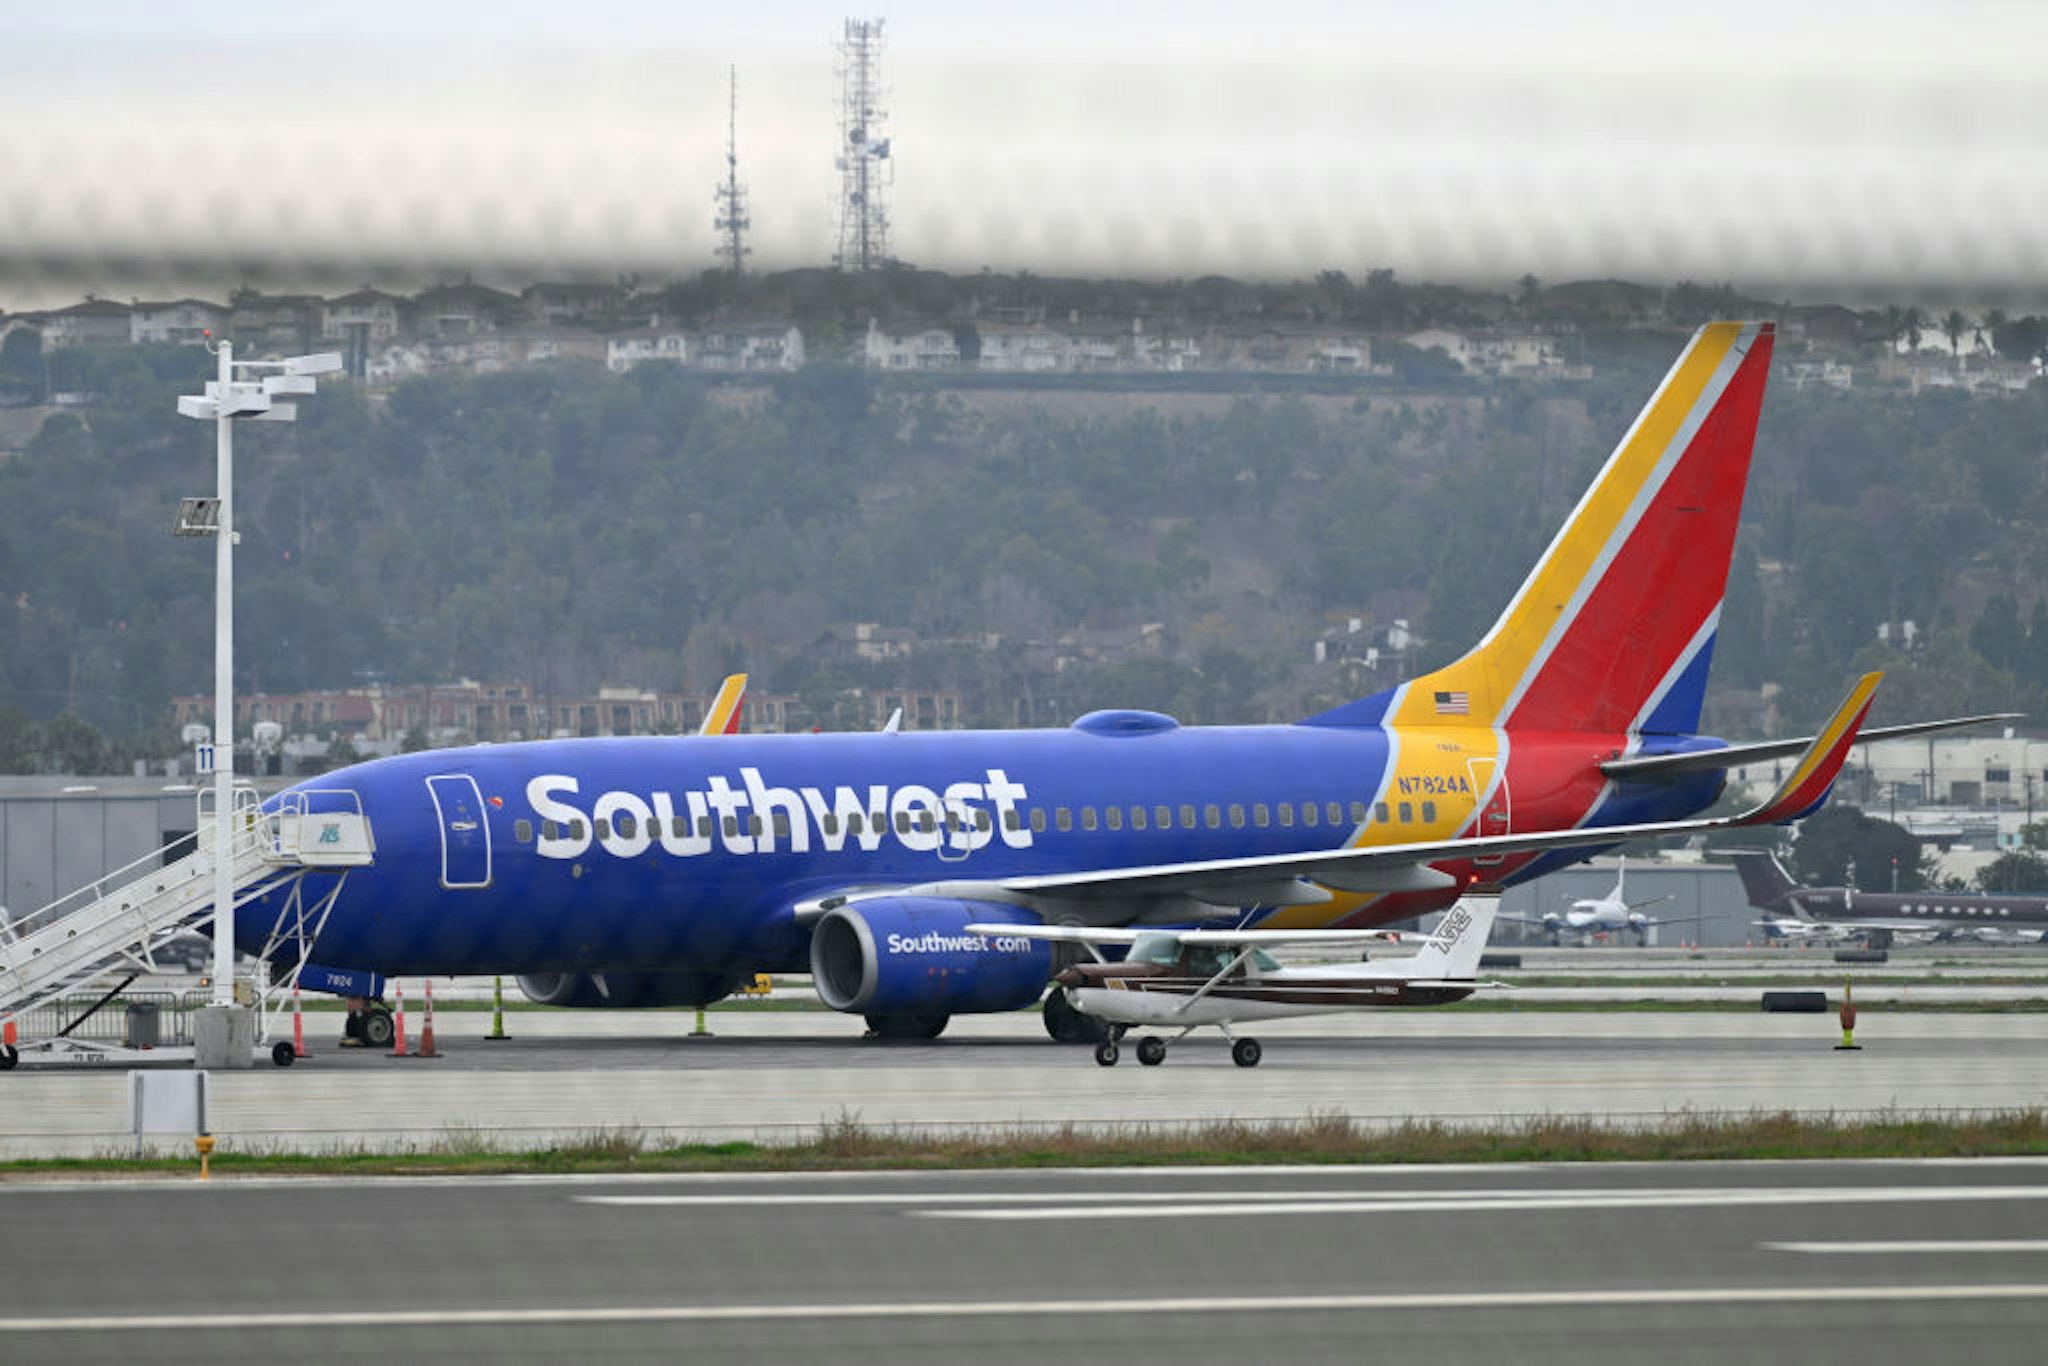 Long Beach, CA - December 27: Many airplanes are on the ground as Southwest Airlines has canceled hundreds of flights, departing from airports across Southern California including Long Beach on Tuesday, December 27, 2022. (Photo by Brittany Murray/MediaNews Group/Long Beach Press-Telegram via Getty Images)